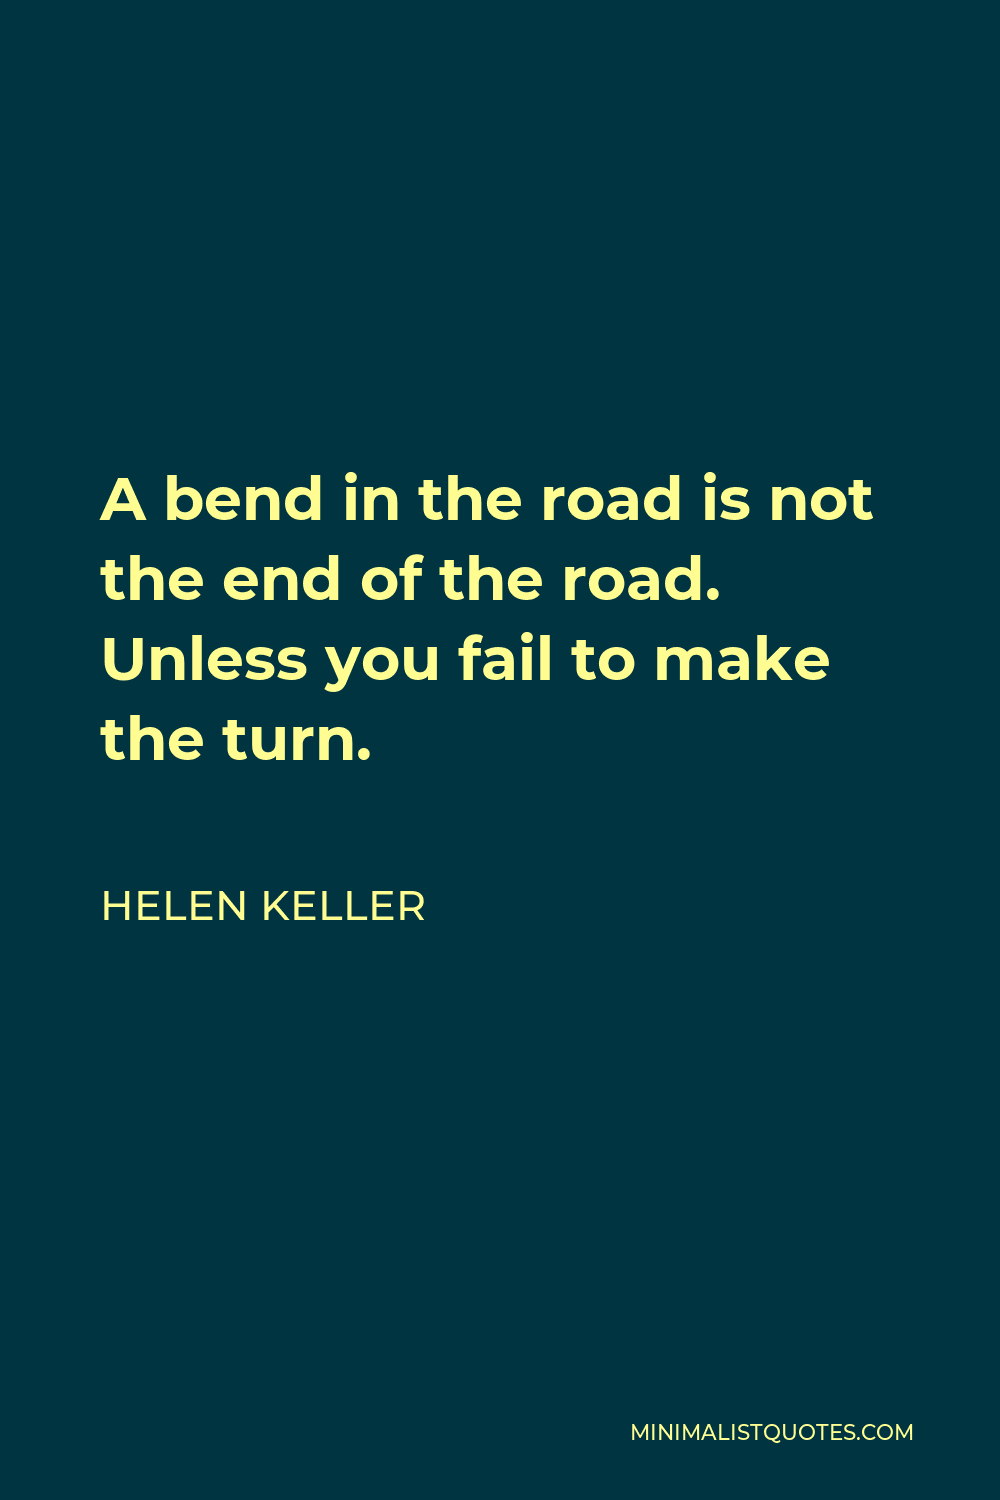 Helen Keller Quote - A bend in the road is not the end of the road. Unless you fail to make the turn.